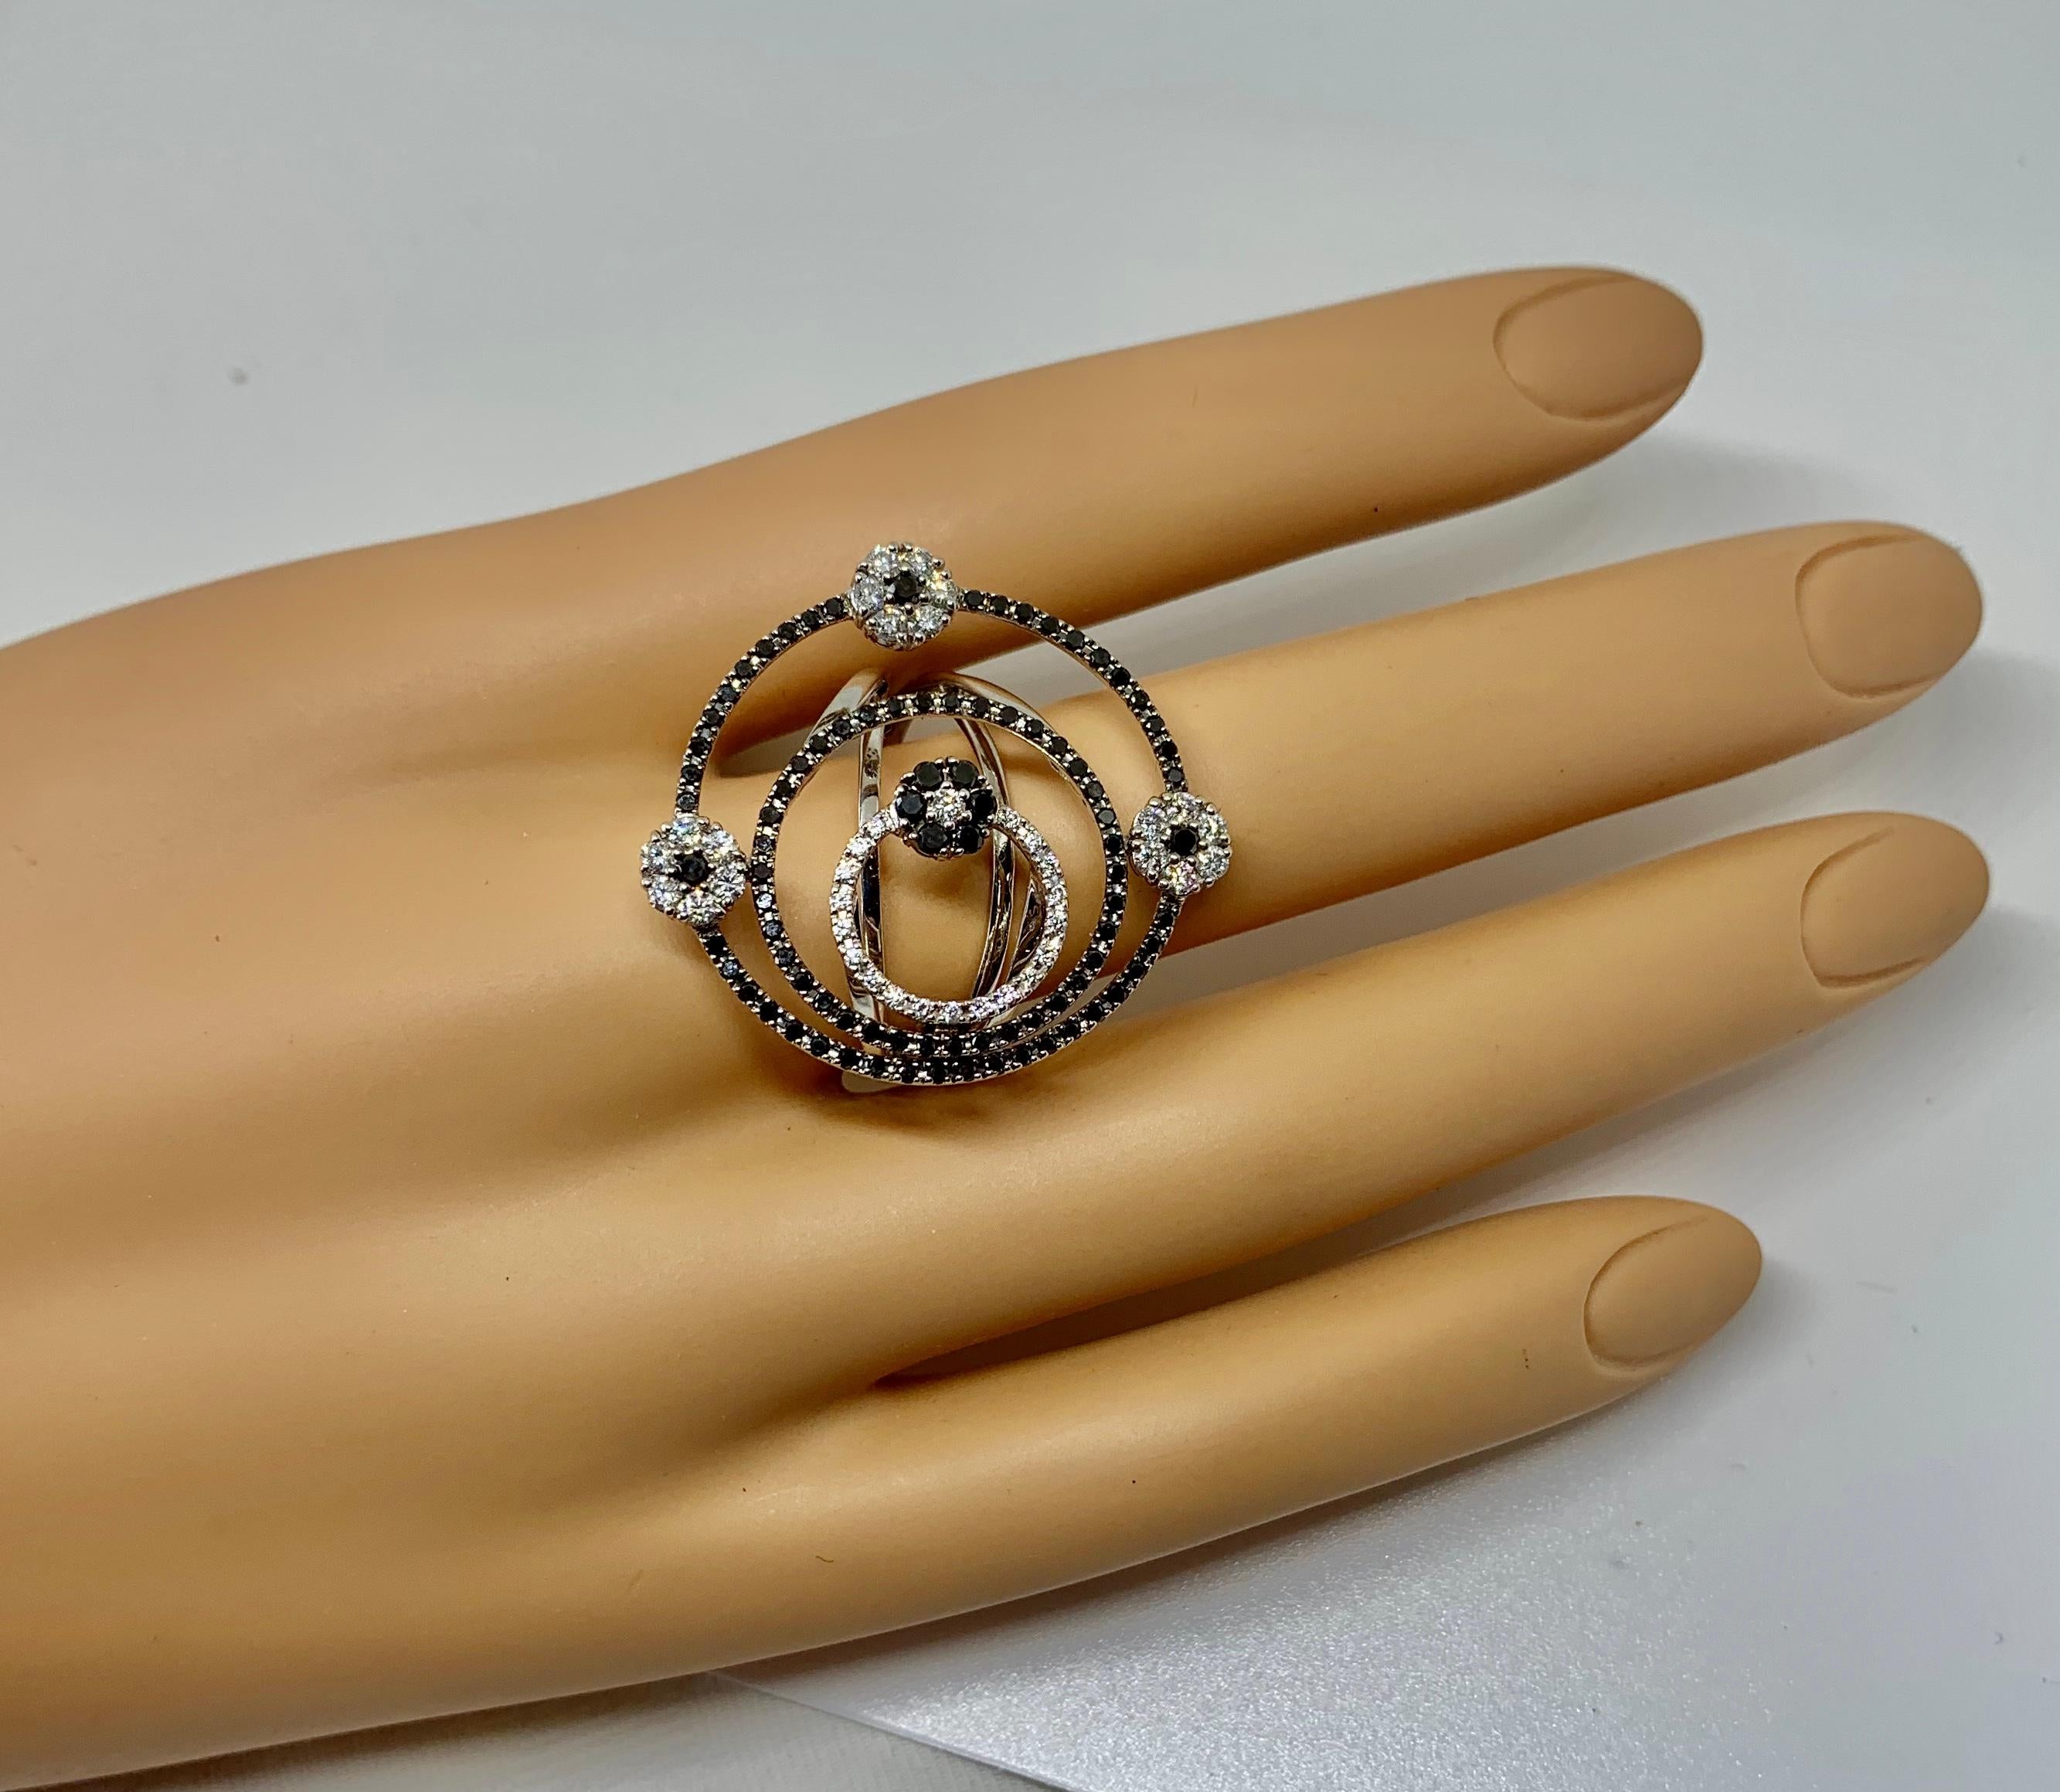 This is a stunning and rare ring by Roberto Coin in a circle flower motif design with Black and White Diamonds in 18 Karat White Gold.  The fabulous ring is large and dramatic and is a very rare Roberto Coin piece.  The design is just spectacular